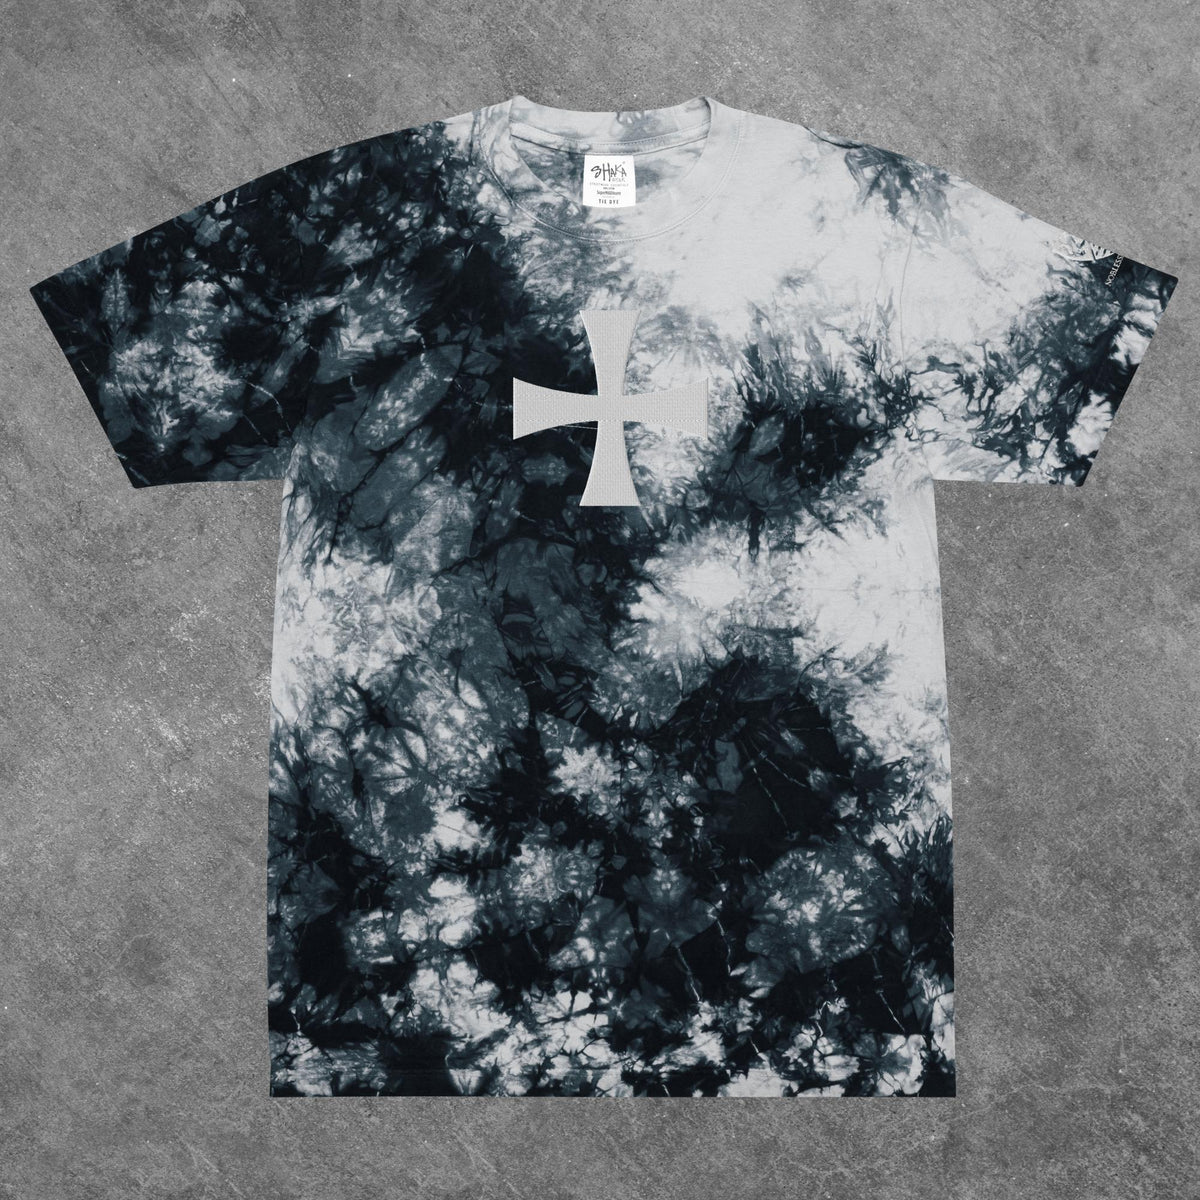 Heights - White Shirts for Tie Dye